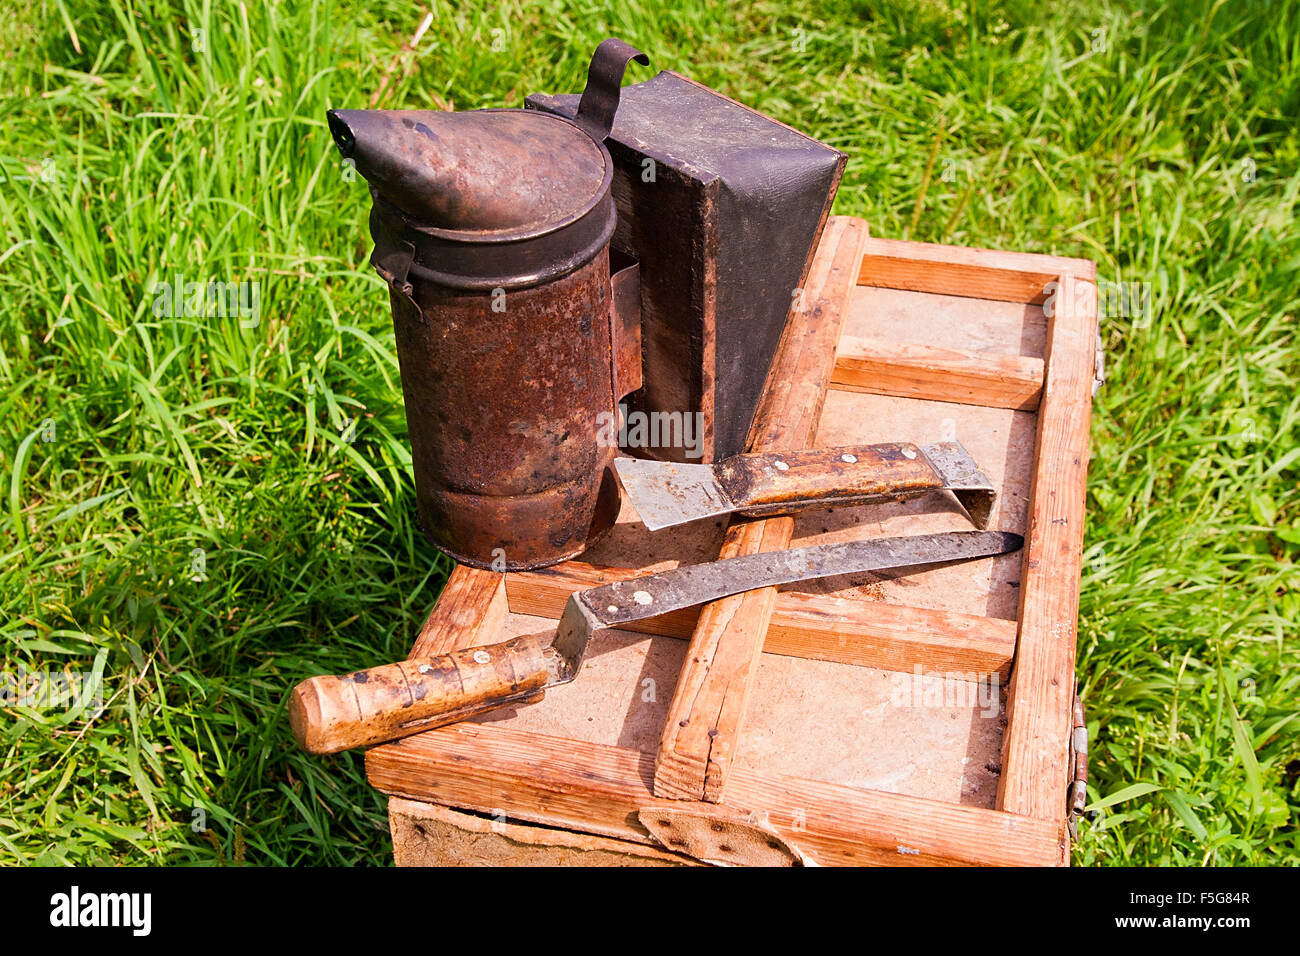 Vintage smoker and different kinds of beekeeper knifes on the wooden box. Stock Photo